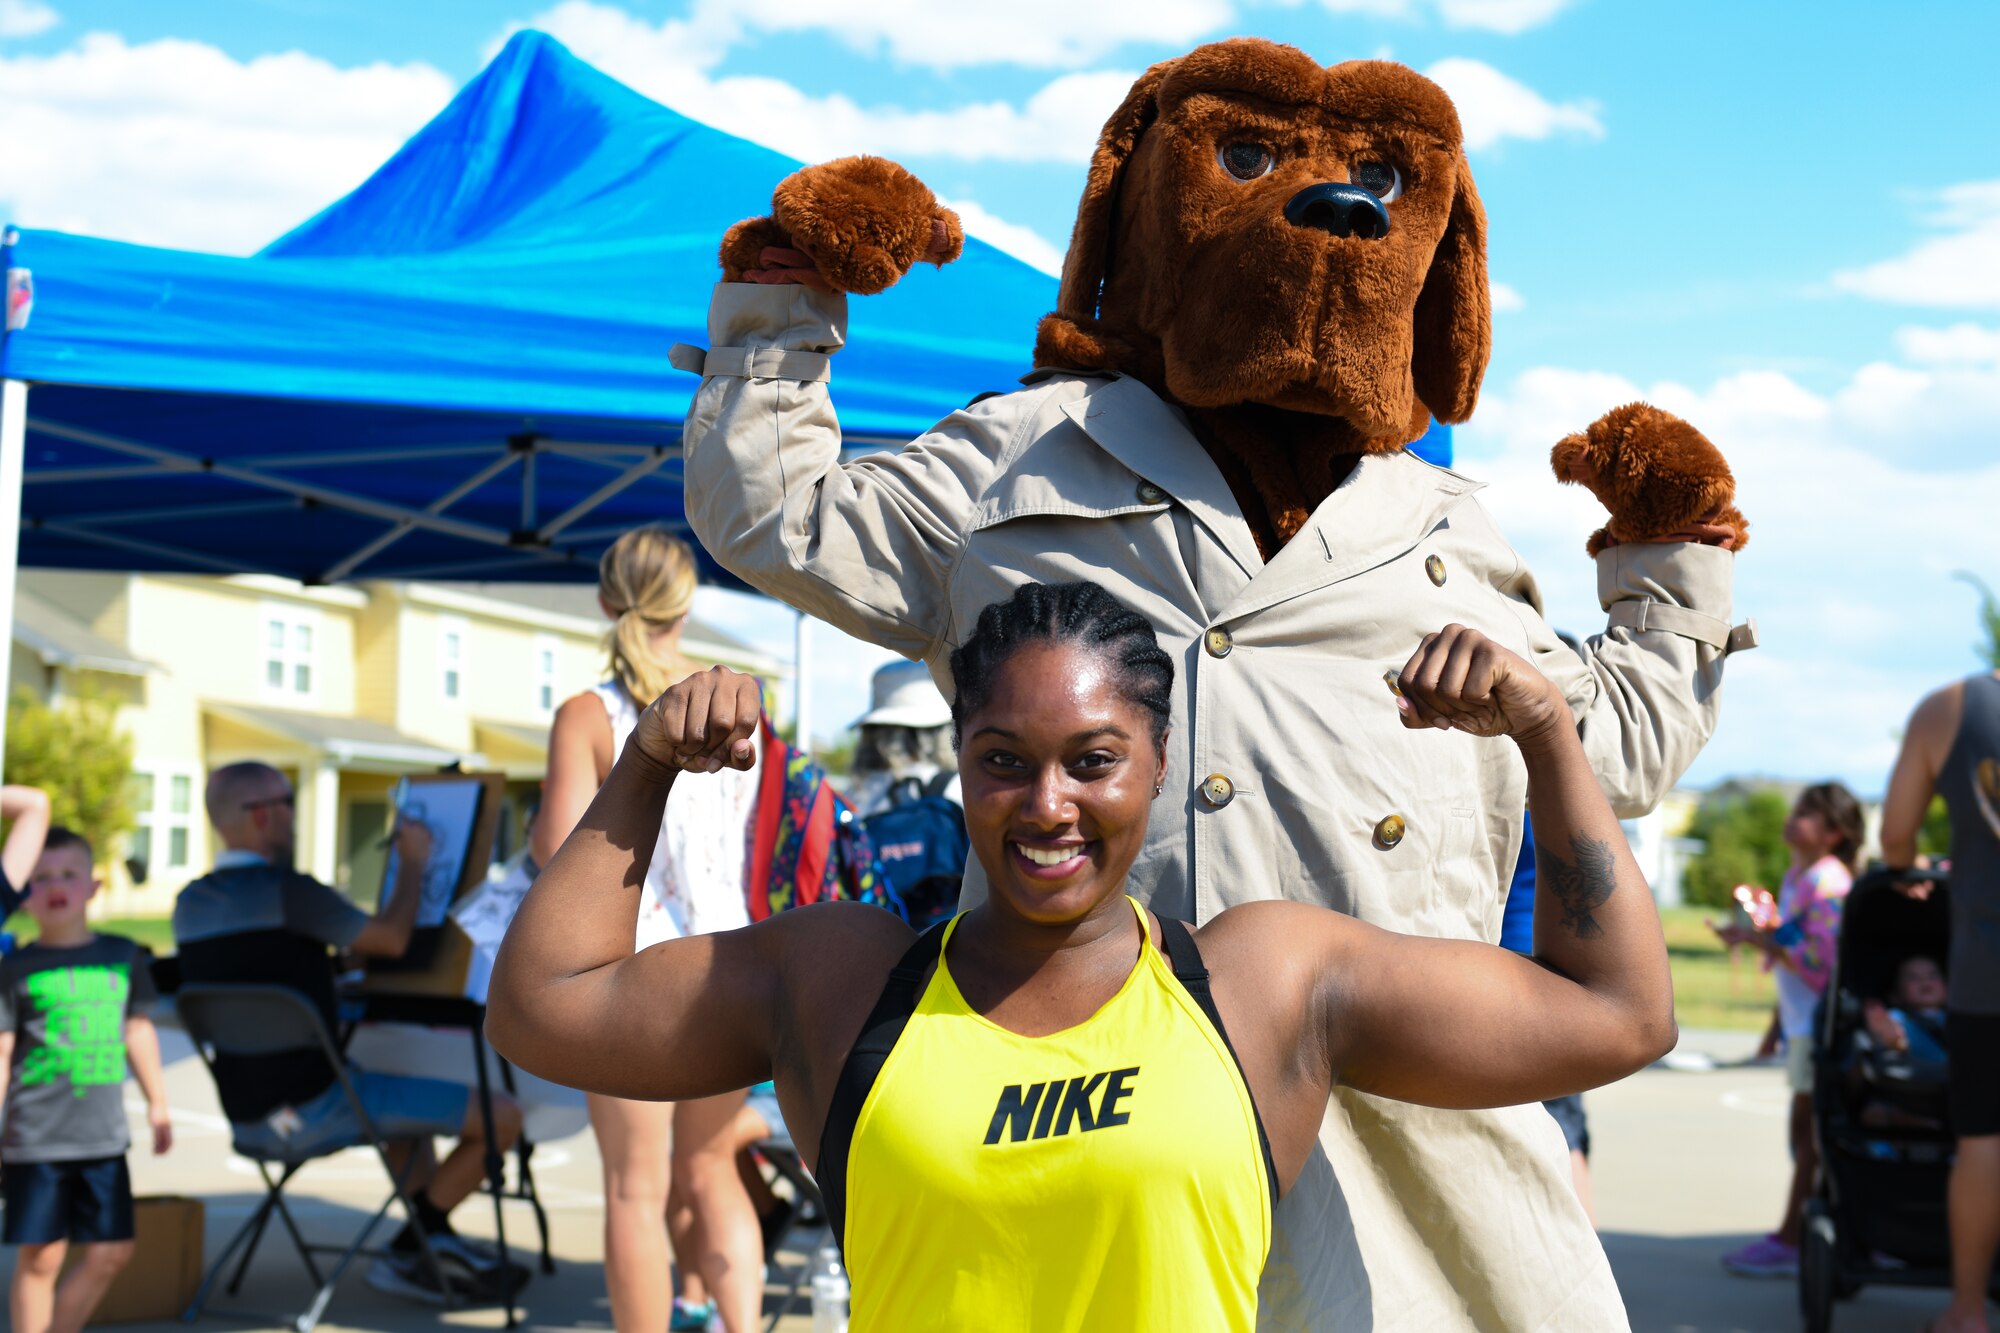 Special Agent Aurielle Owens, Detachment 801, flexes at the National Night Out event, Aug. 6, 2019, on Buckley Air Force Base, Colo. Buckley’s first responders took
a break from fighting crime and came out to the event to bring the community together.